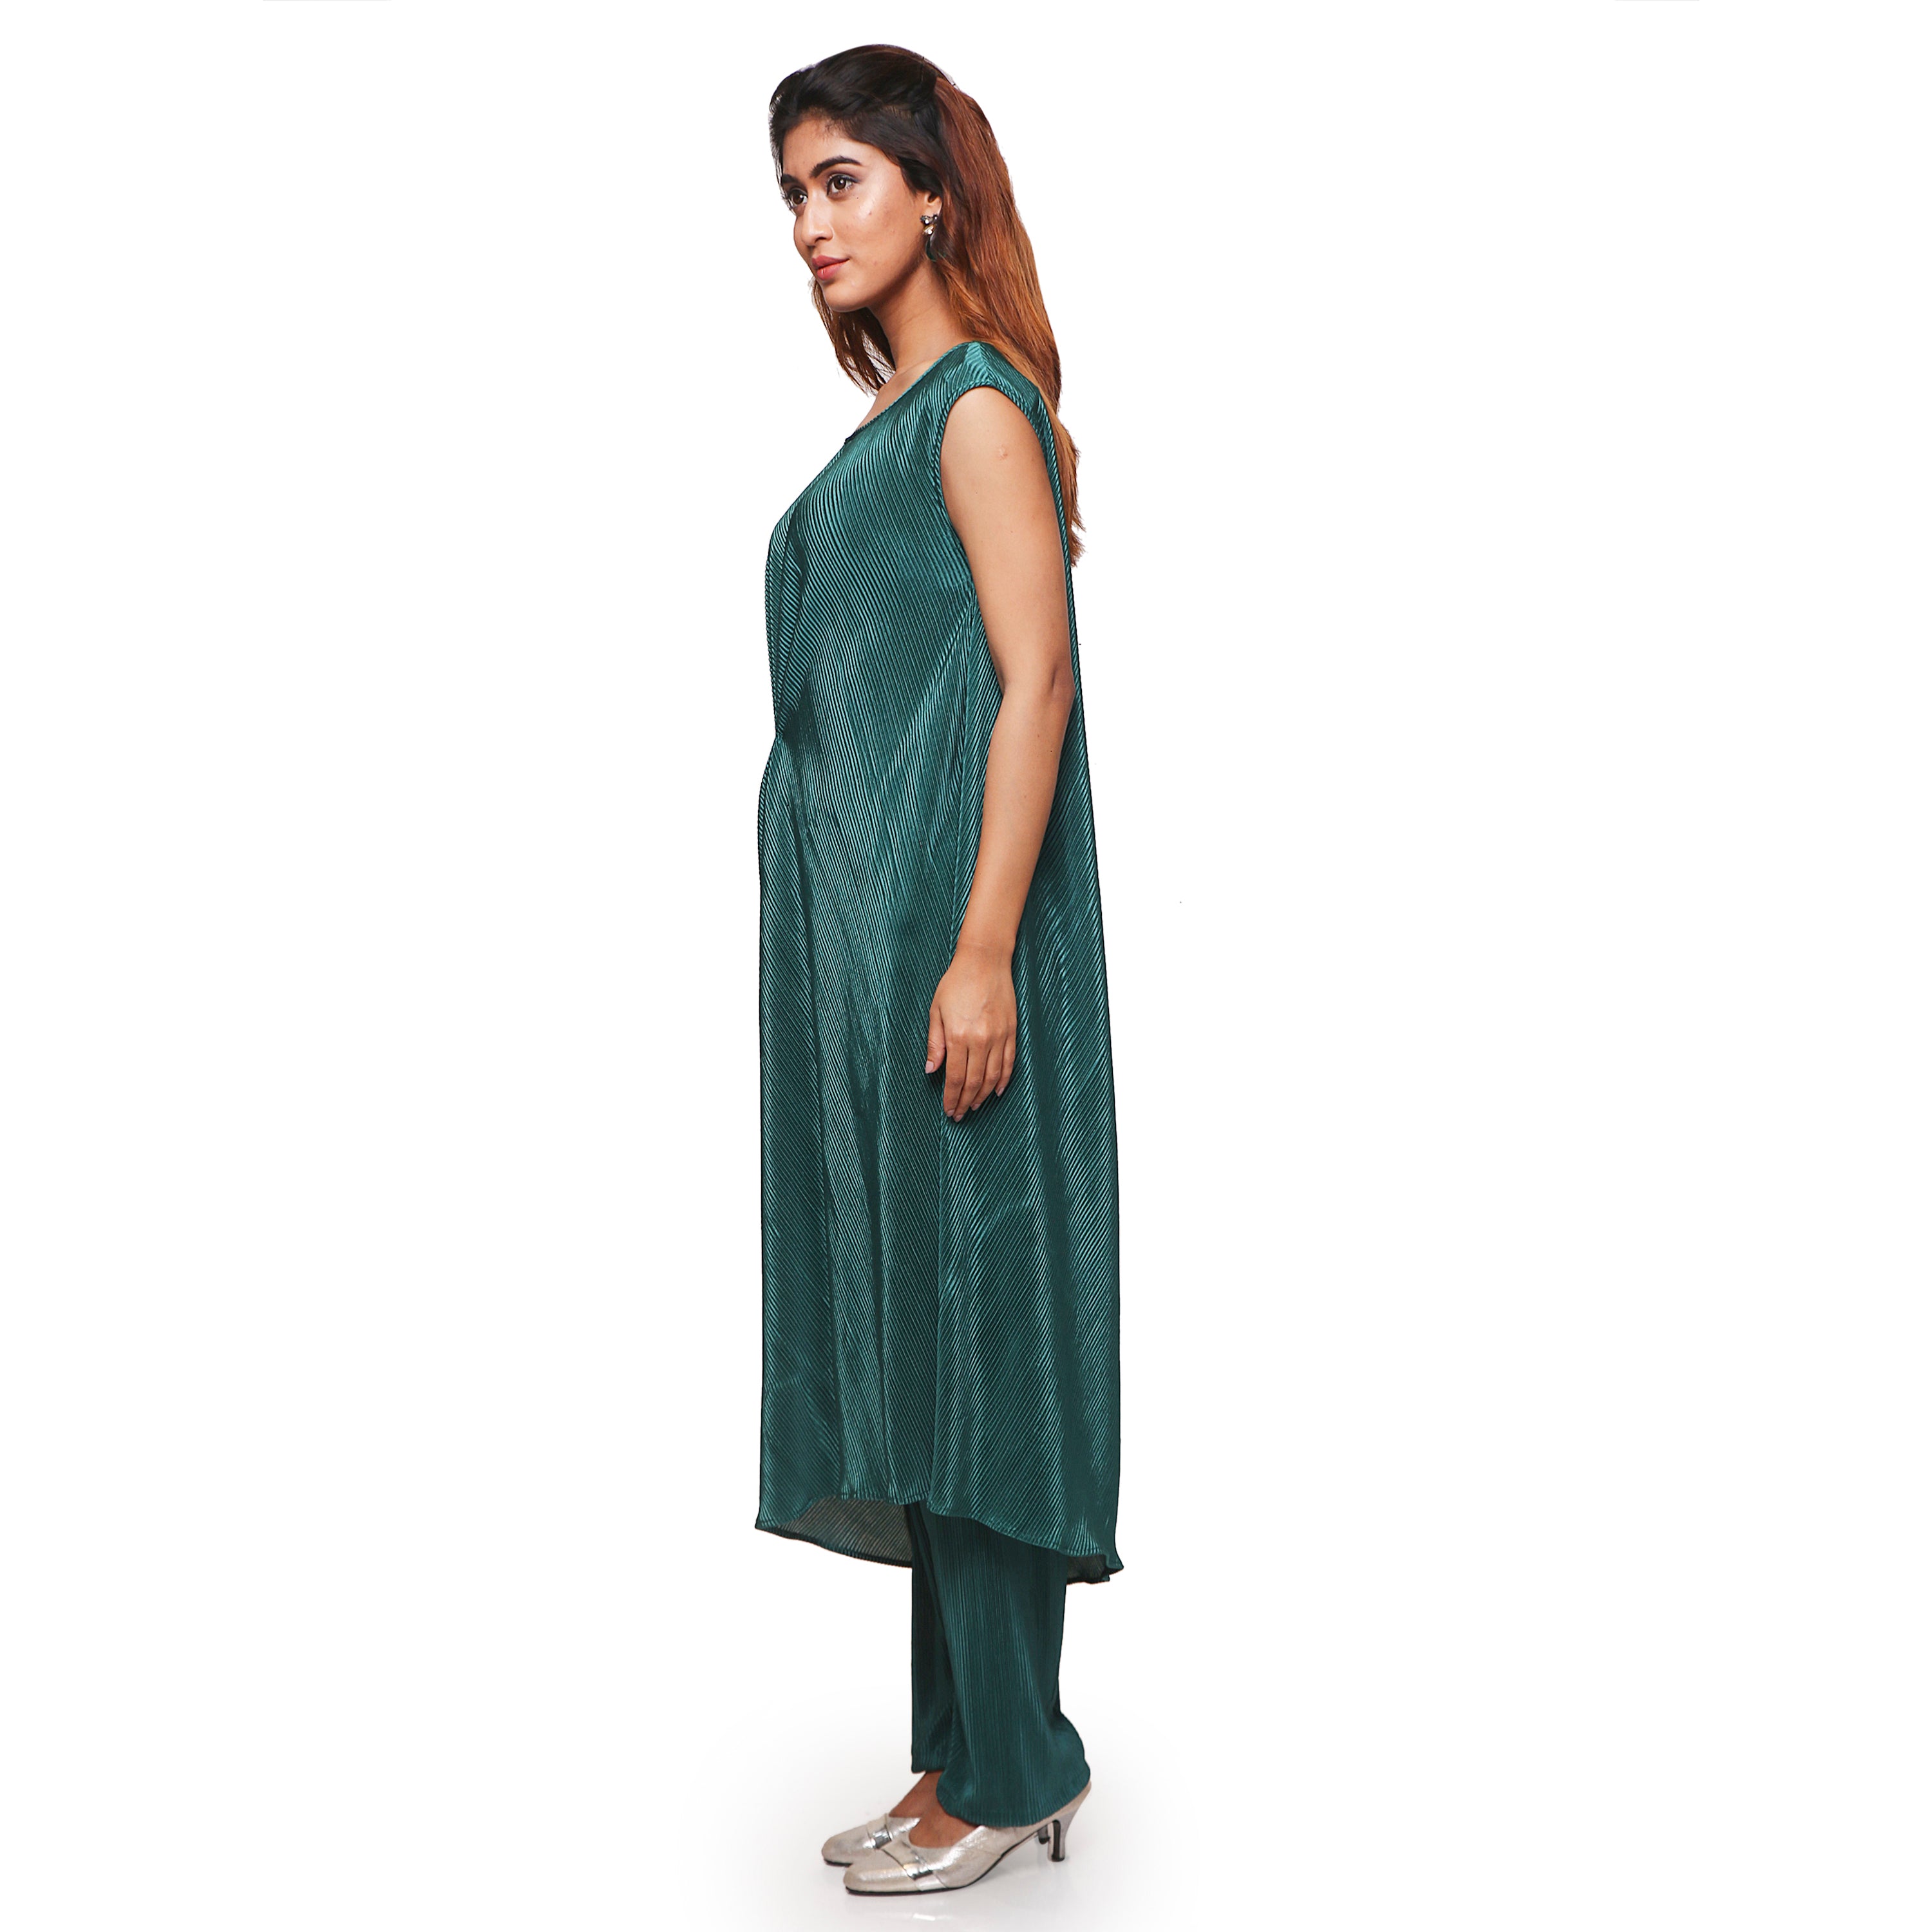 One piece draped dress with pant